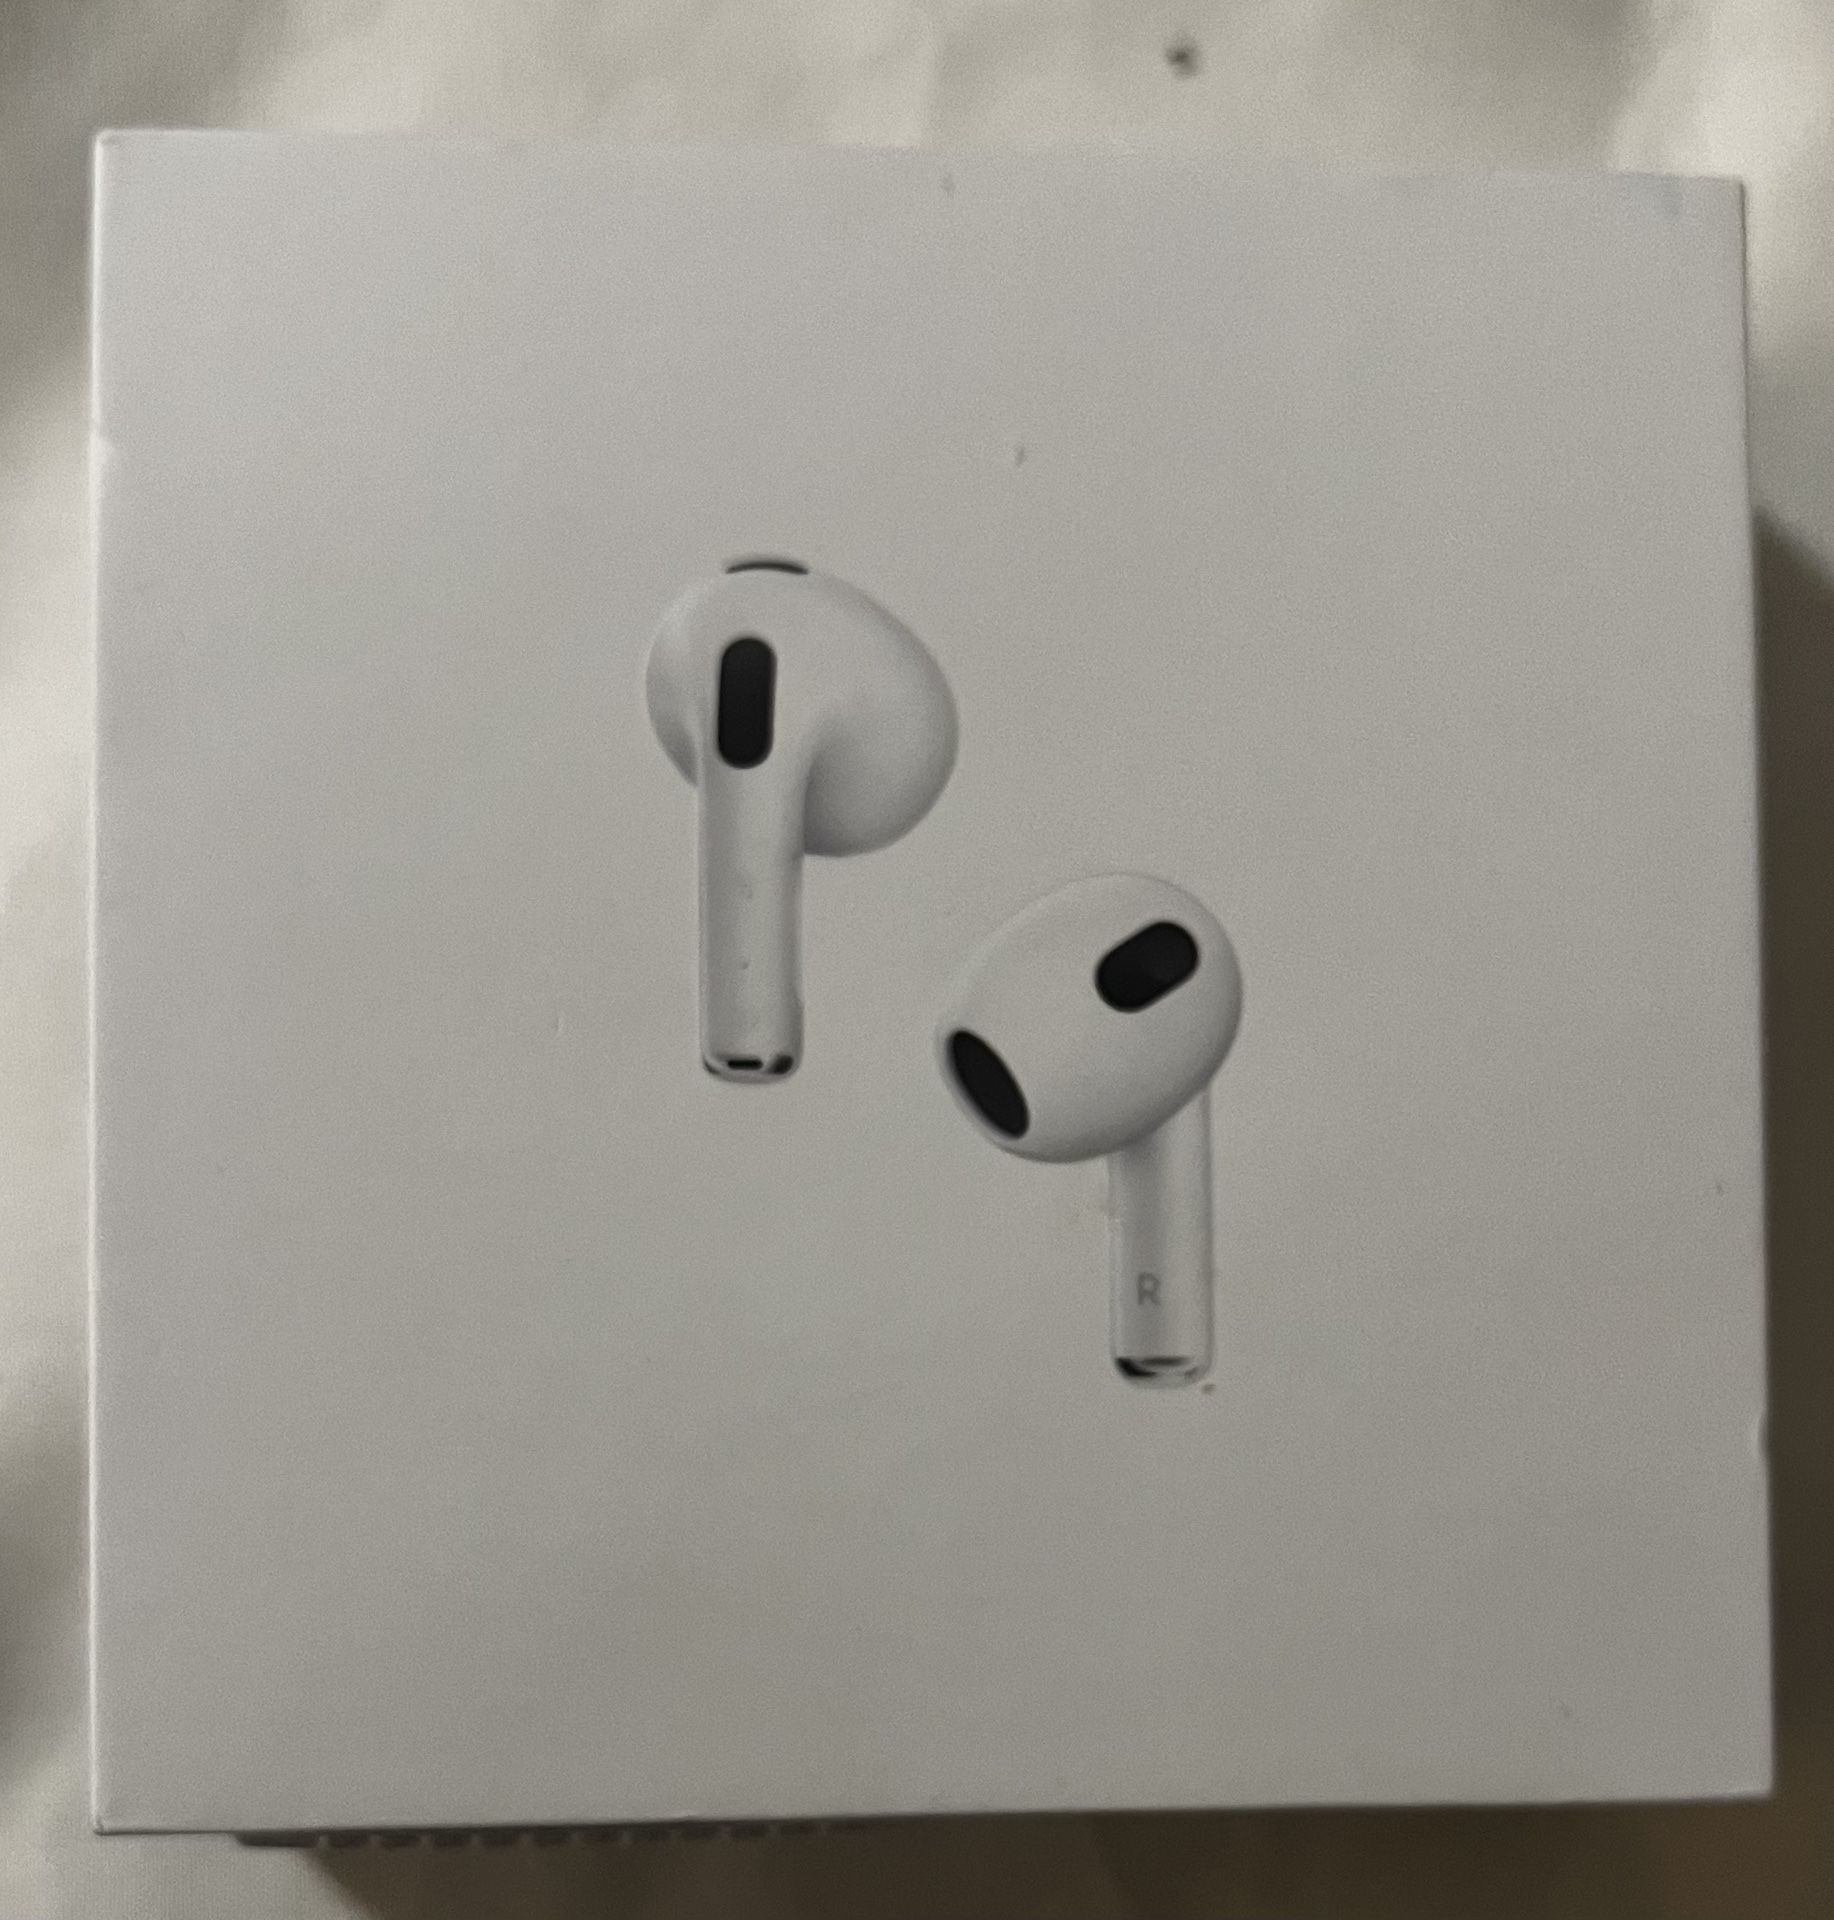 Apple AirPods (3rd Generation) Wireless Ear Buds, Bluetooth Headphones, Personalized Spatial Audio, Sweat and Water Resistant, Lightning Charging Case